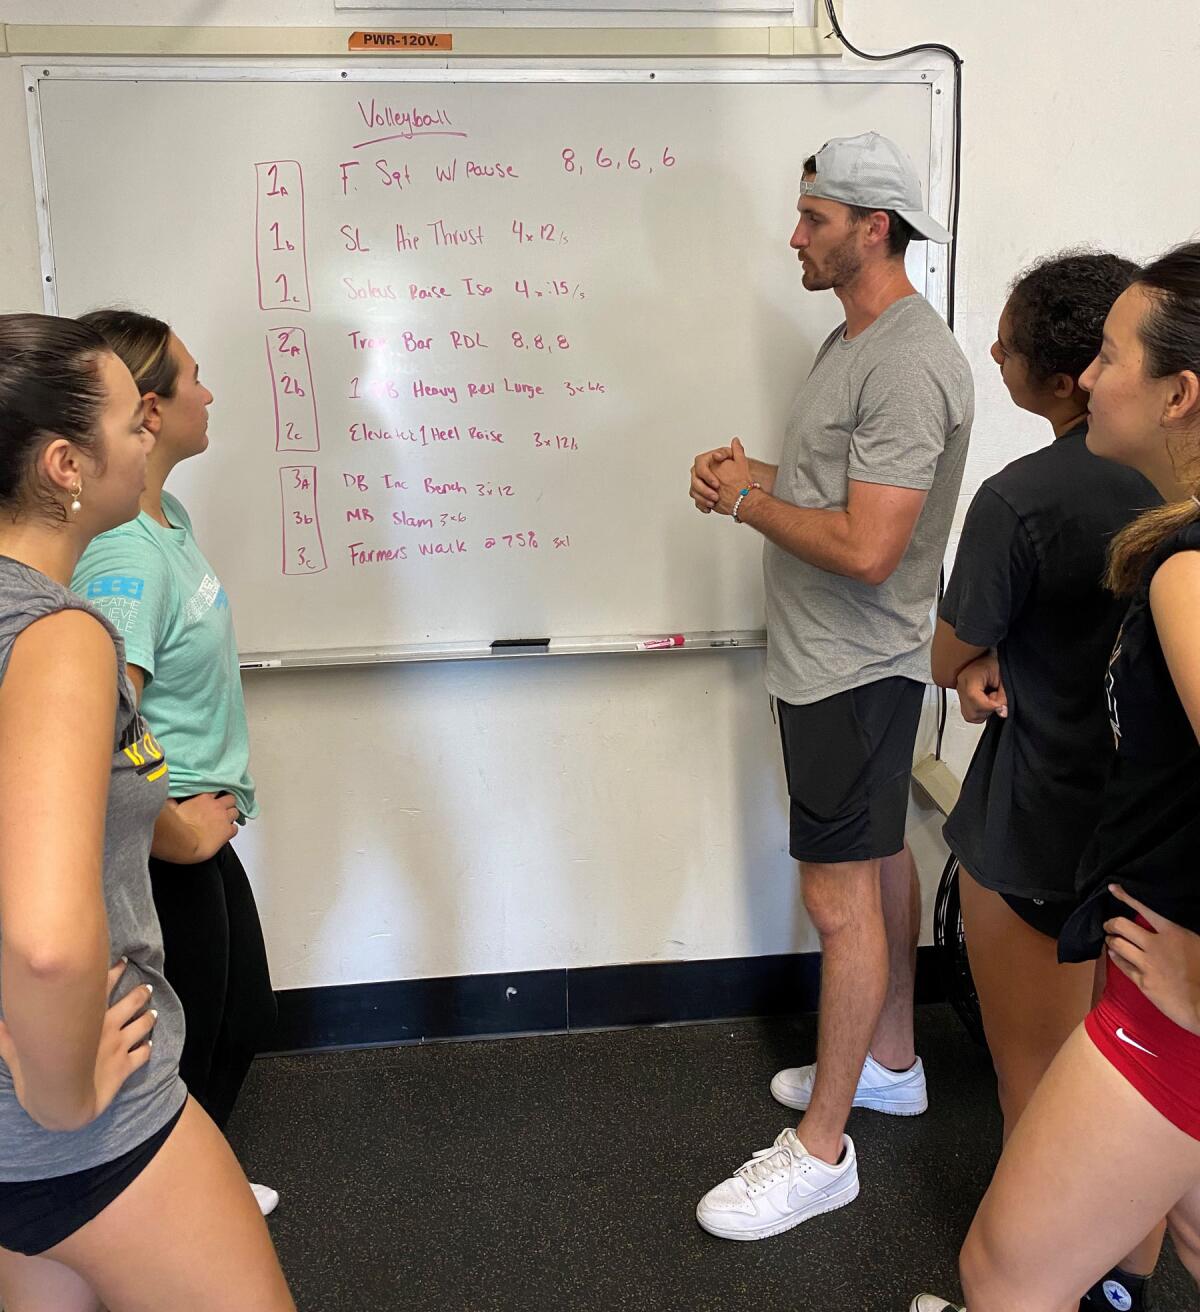 Mission Bay High volleyball players listening to Coach Teddy Anderson talk about their workout plan.